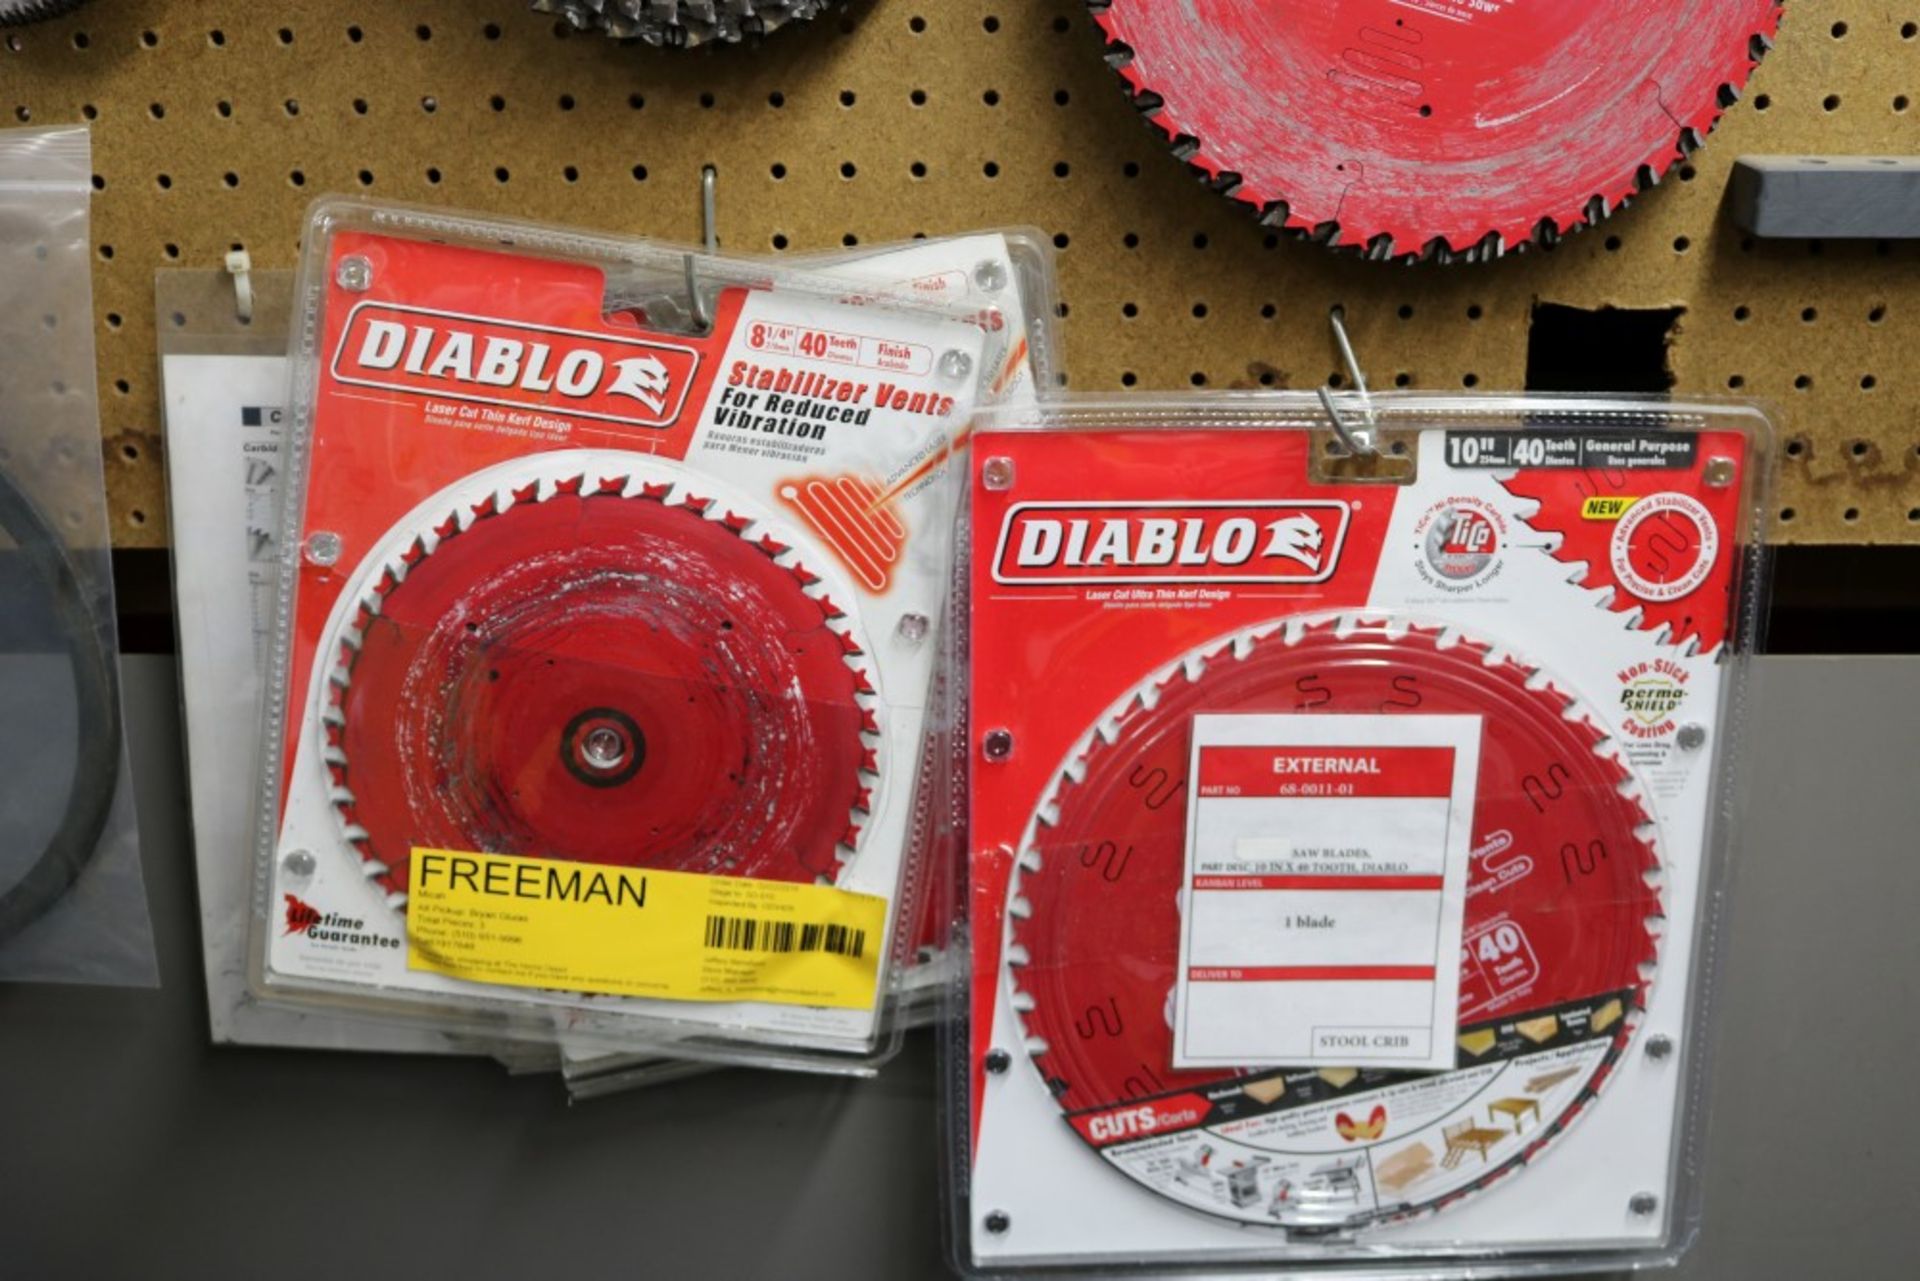 Wall of Various Size Saw Blades, 7 1/4", 8", 8 1/4", 10" - Image 4 of 5